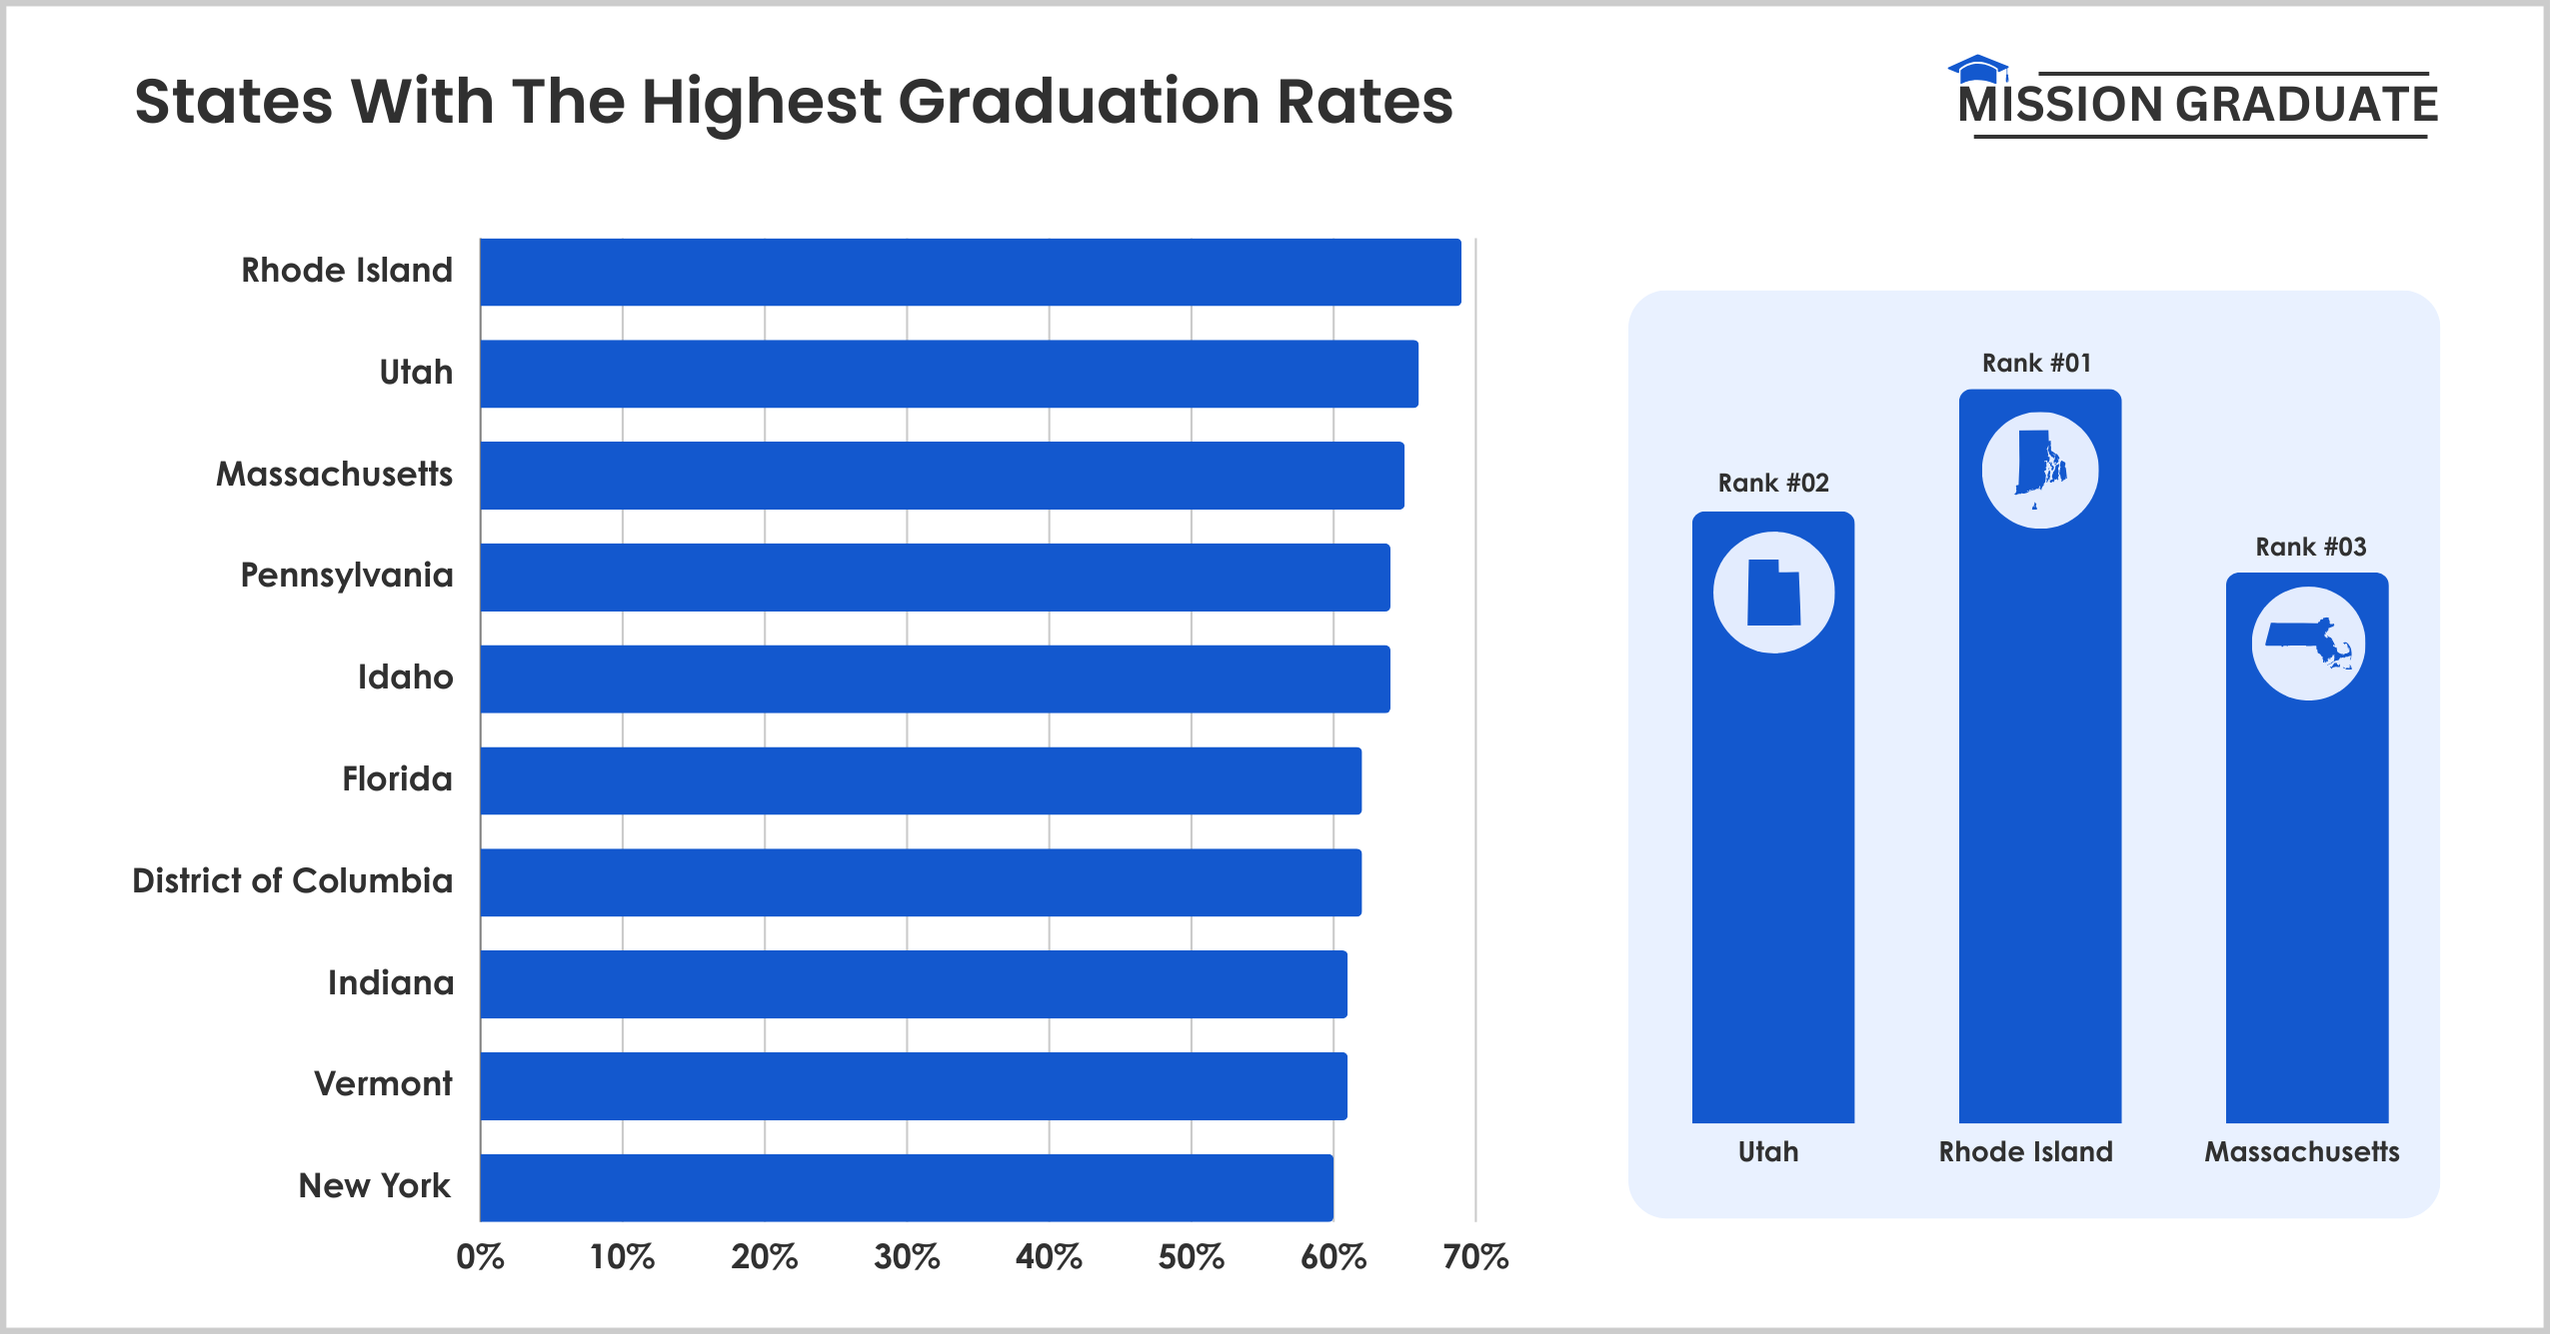 States With The Highest Graduation Rates